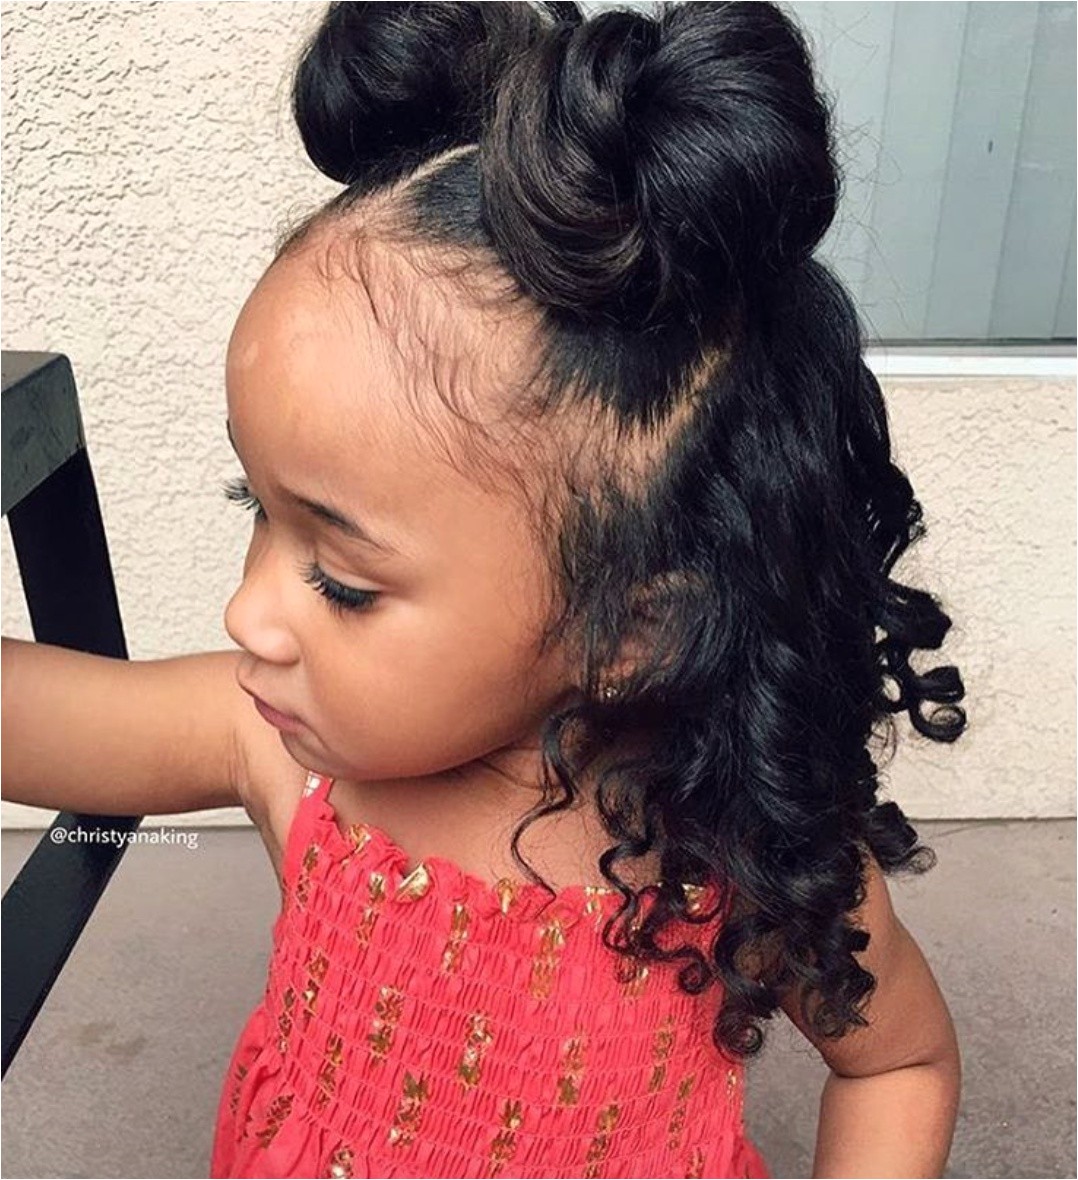 So adorable christyanaking gallery so adorable christyanaking So adorable christyanaking from Hairstyles For 1 Year Old Baby Girl